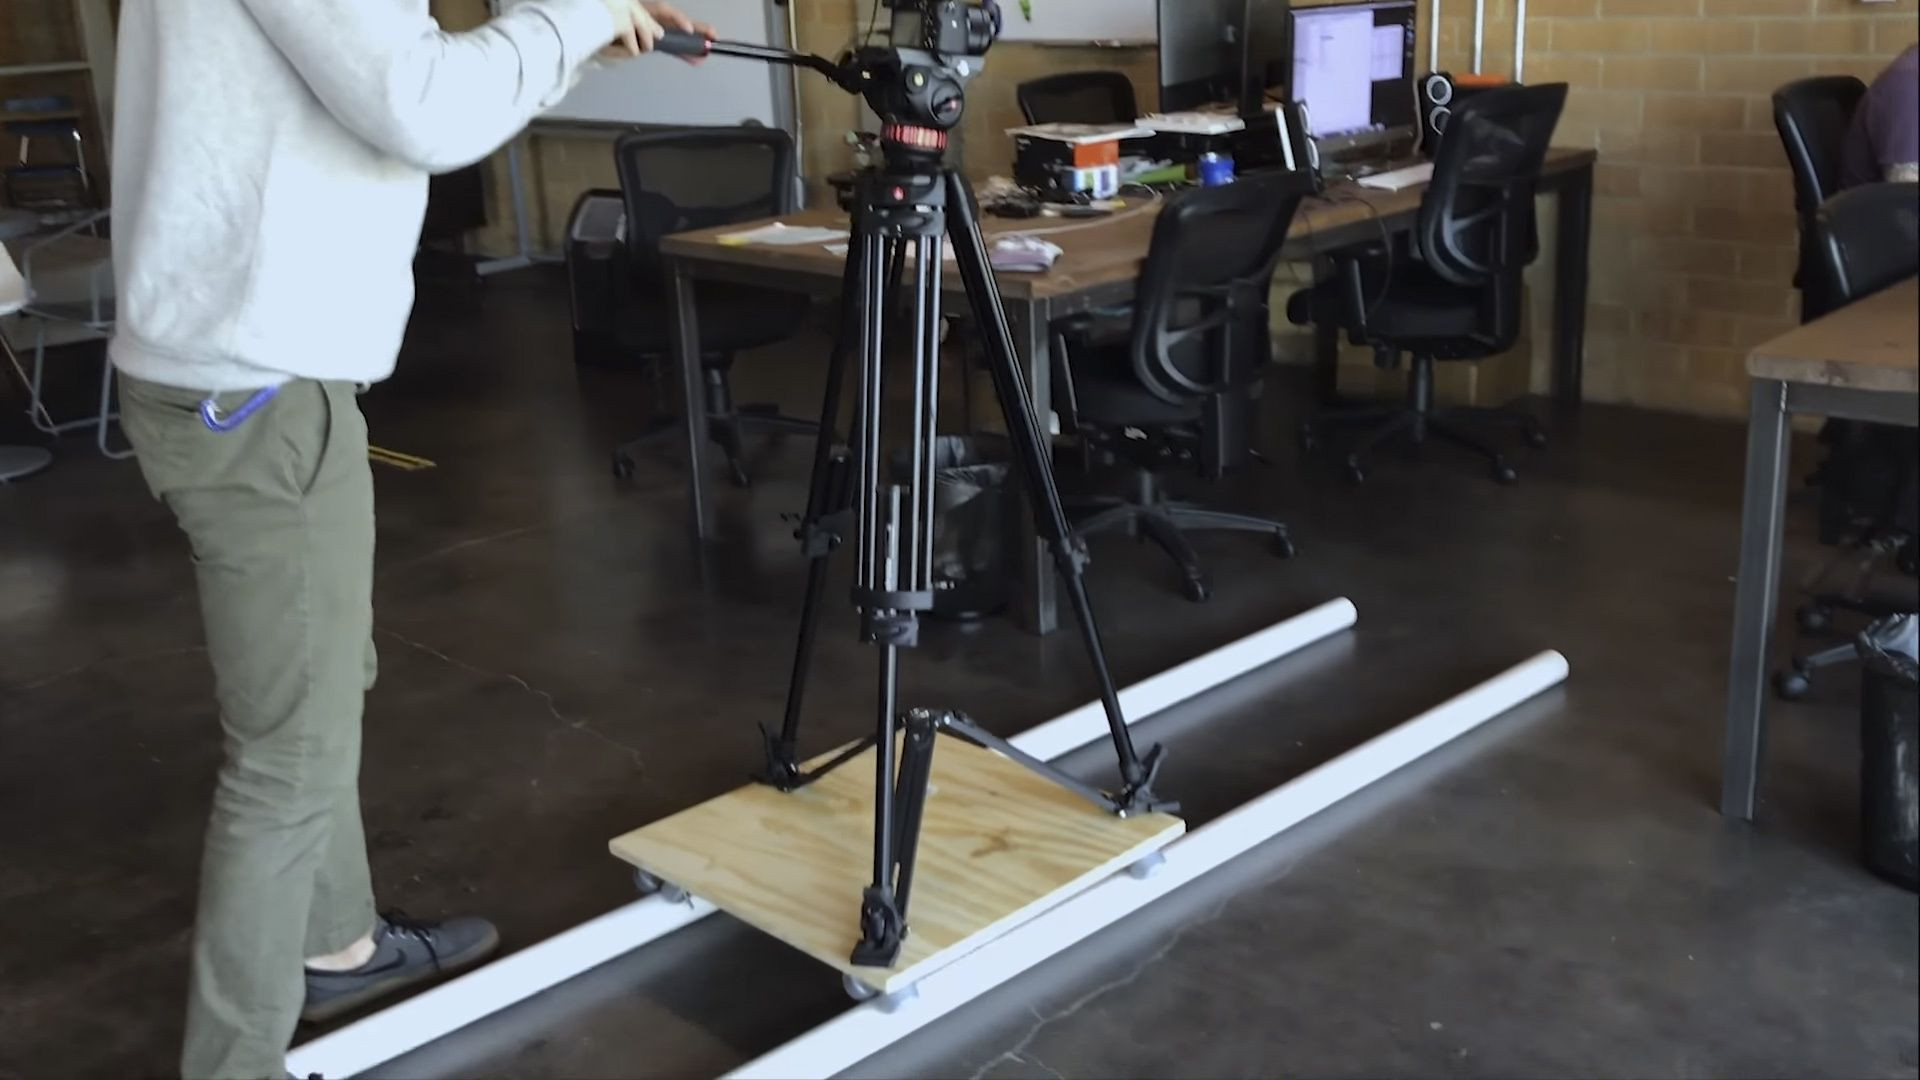 DIY Camera Dolly Track
 How to build your own DIY track dolly for under $50 DIY